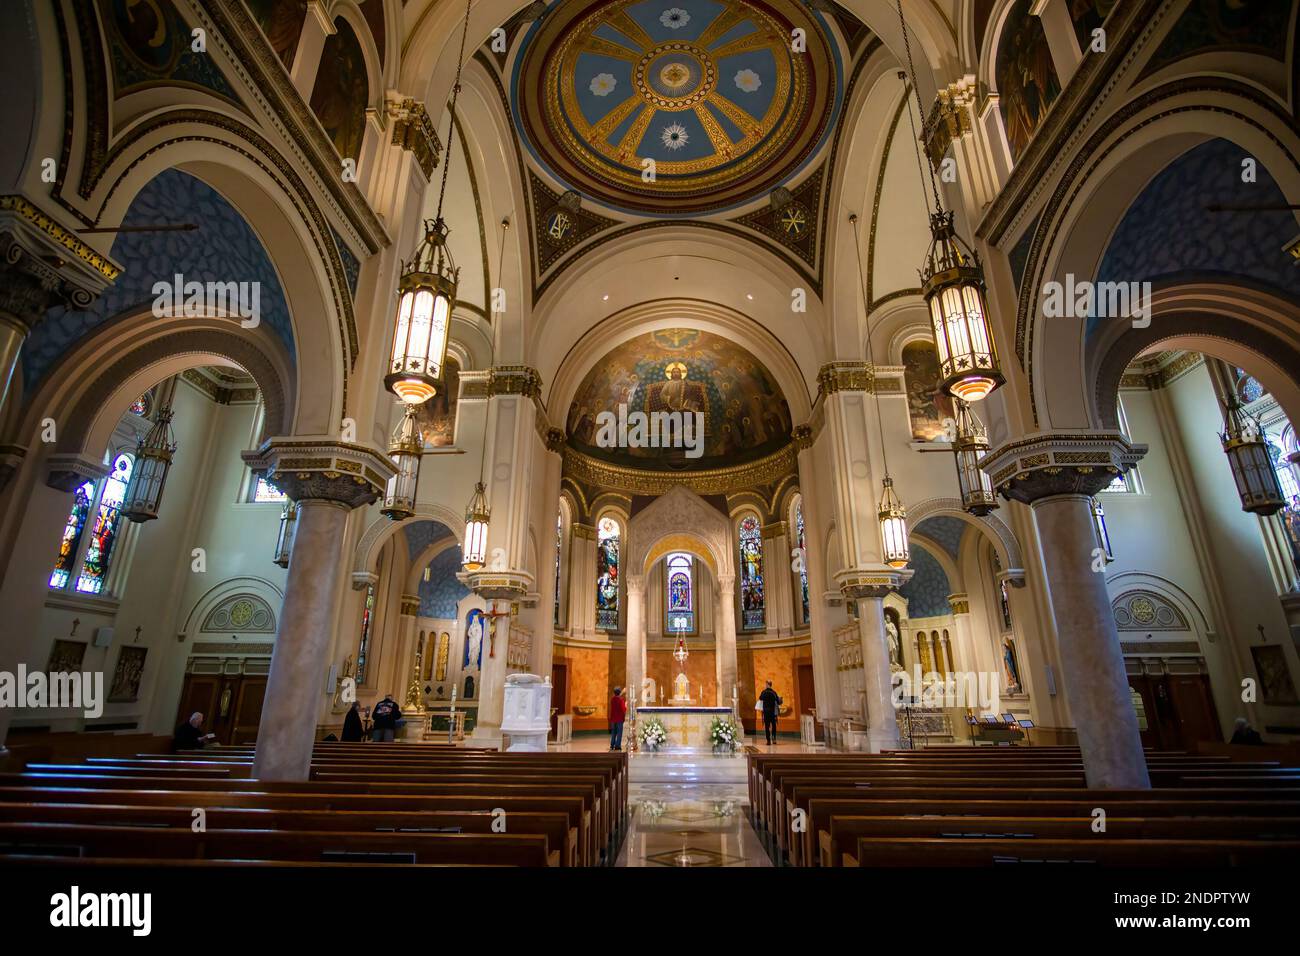 Bronx, NY - USA - Feb 11, 2023 Interior of the Byzantine Revival-style St. Raymond's Church, a parish church in the Bronx. Designed by George H. Stree Stock Photo